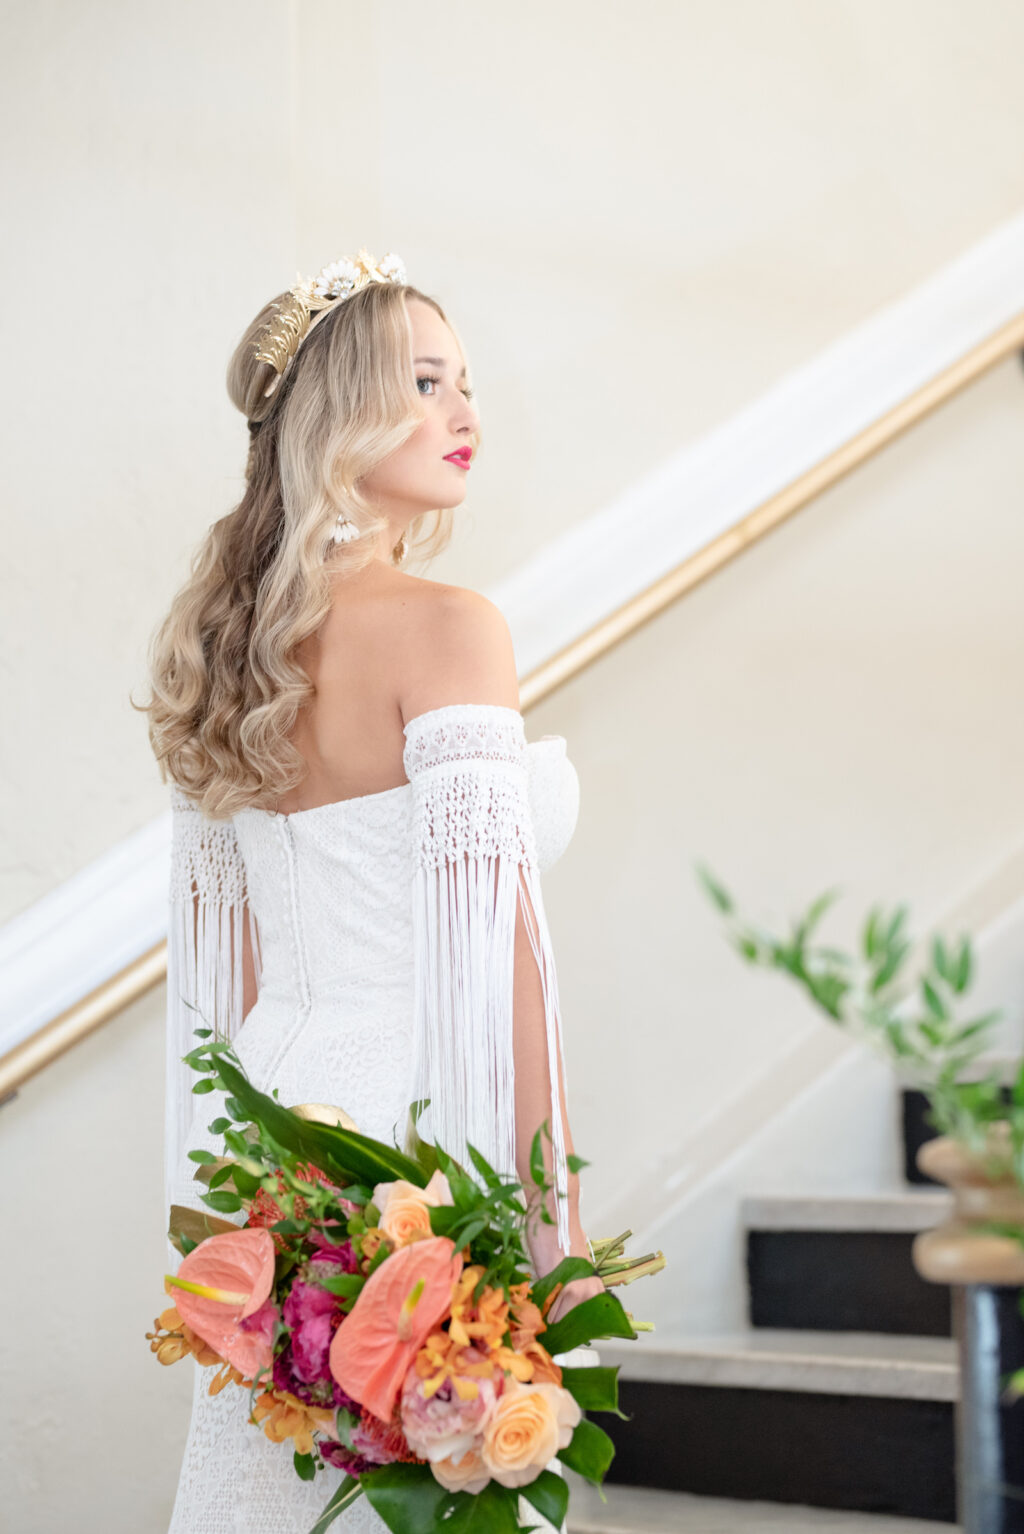 Florida Bride Wearing Vintage Lace and Fringe Off the Shoulder Sleeve Wedding Dress and Gold, Flower Crown Holding Colorful Tropical Floral Bouquet, Pink Anthuriums, Monstera Palm Leaves | Tampa Bay Wedding Planner Eventfull Weddings | Wedding Hair and Makeup Adore Bridal Hair and Makeup